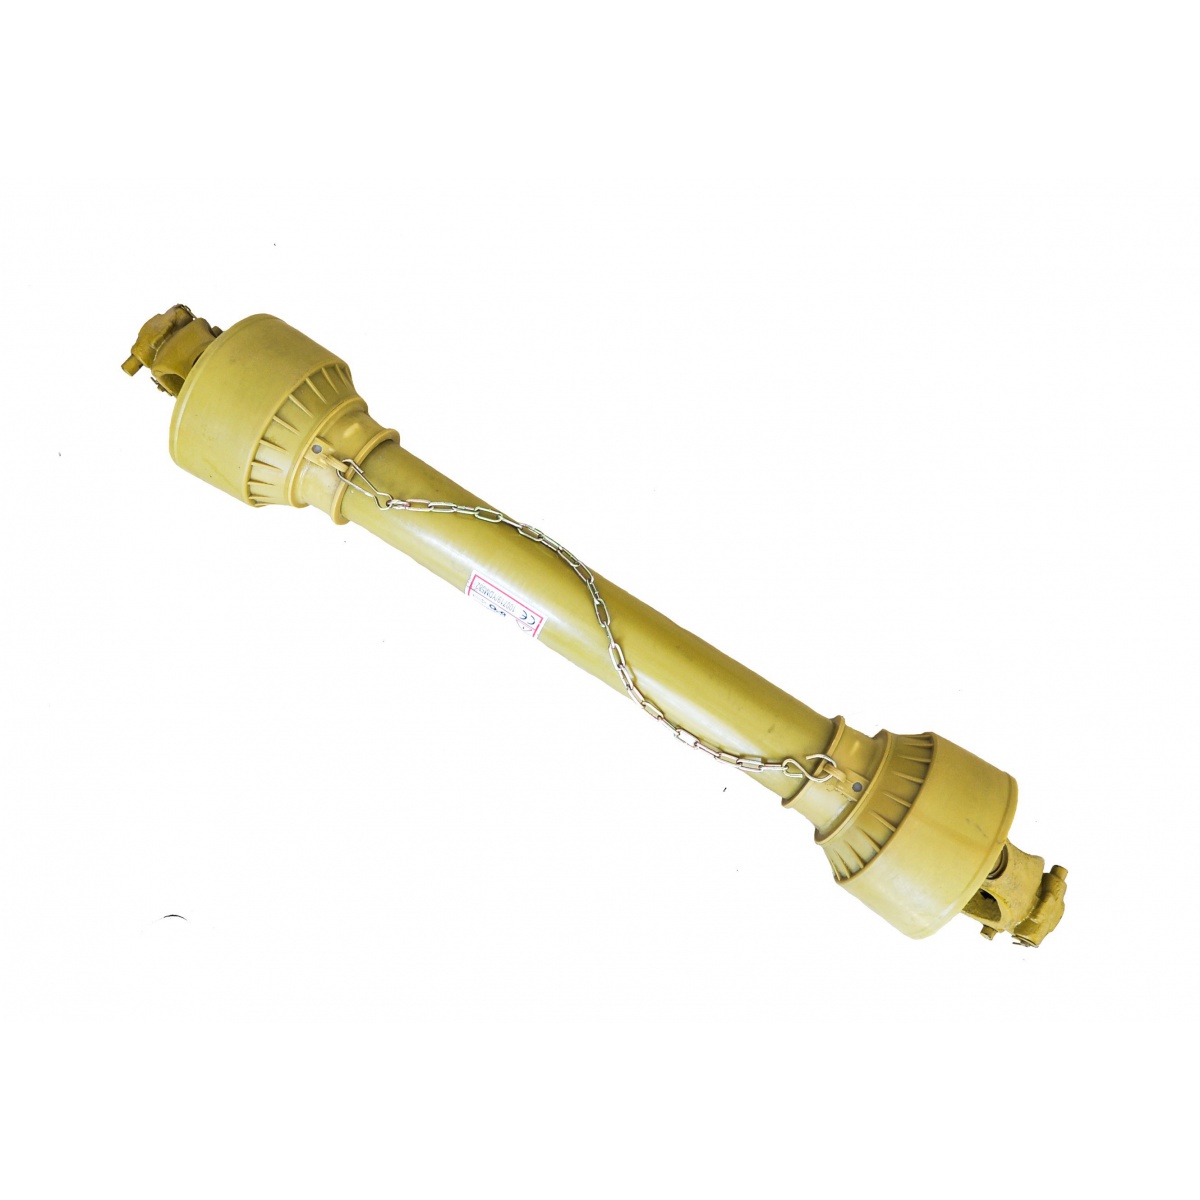 PTO shaft 07B - 90 cm / up to 105 HP